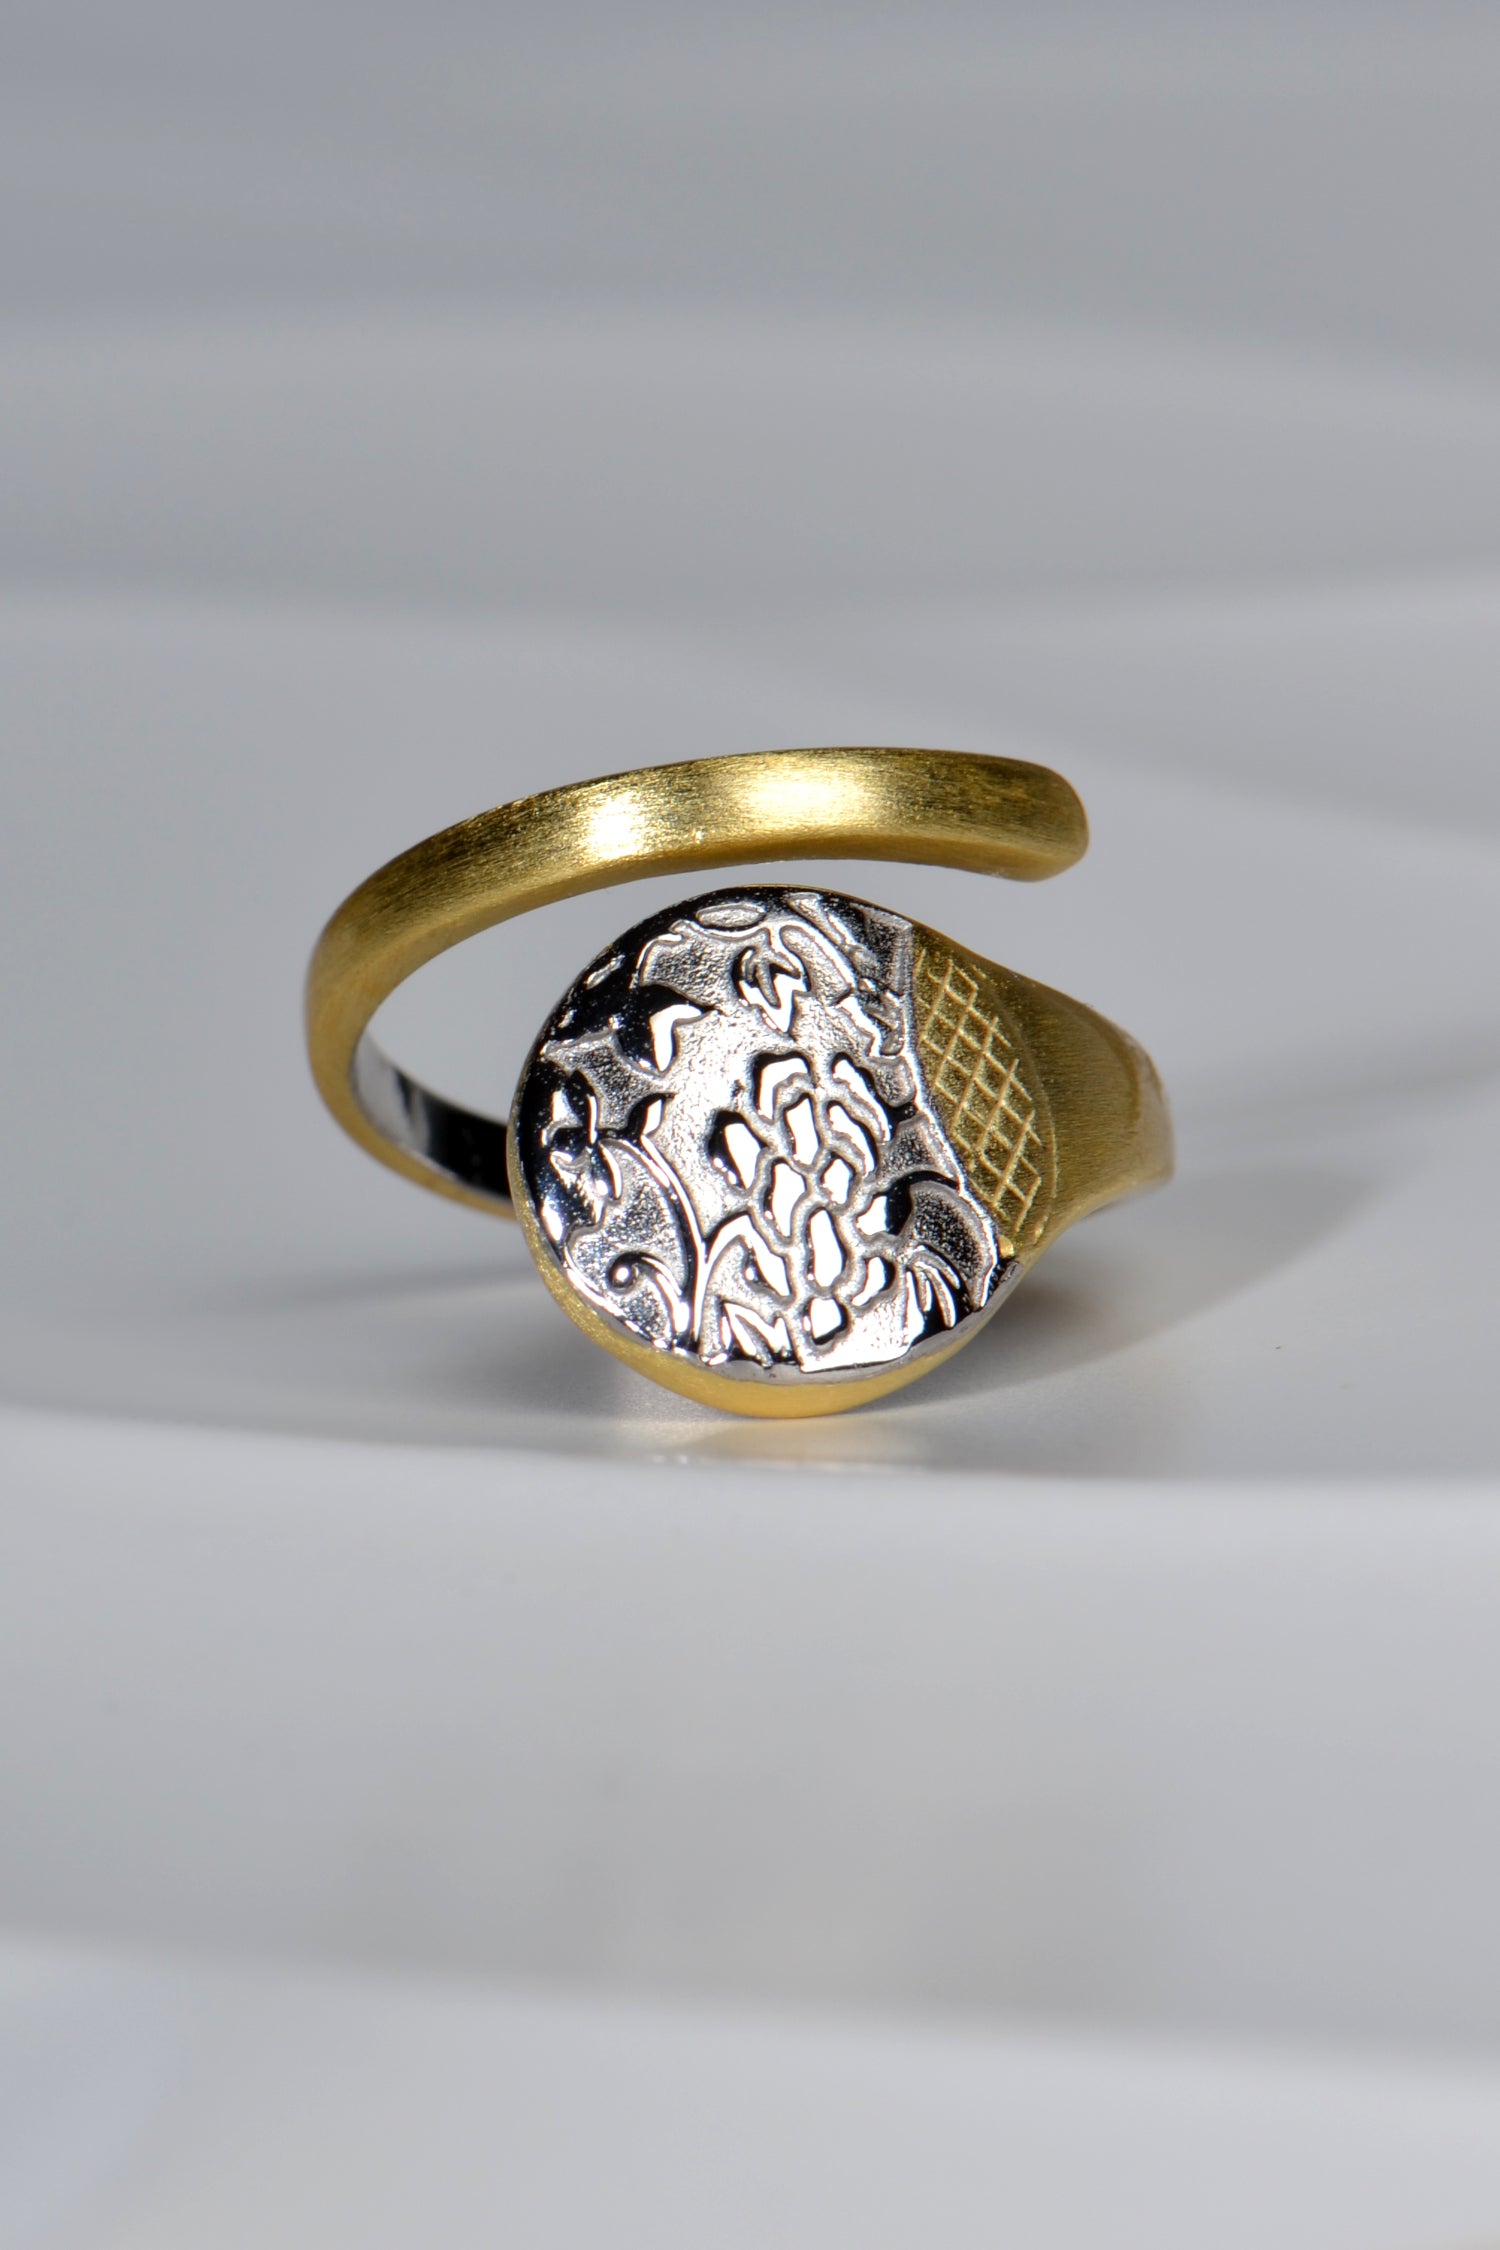 open spiral ring with cherry blossom design sterling silver with 18ct gold plate detail